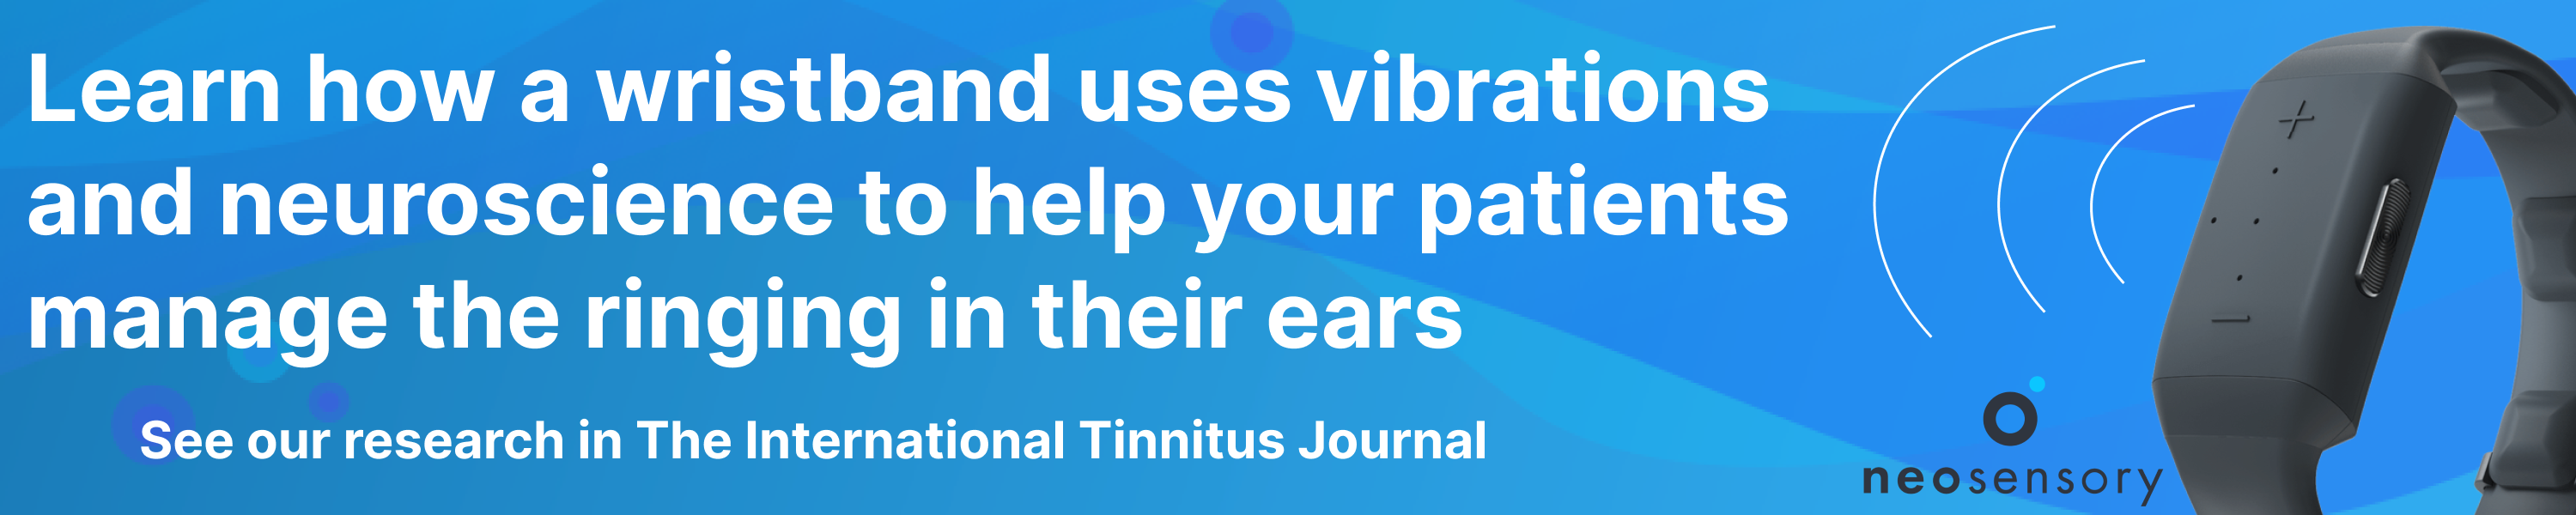 Neosensory research in The International Tinnitus Journal - image of product and logo